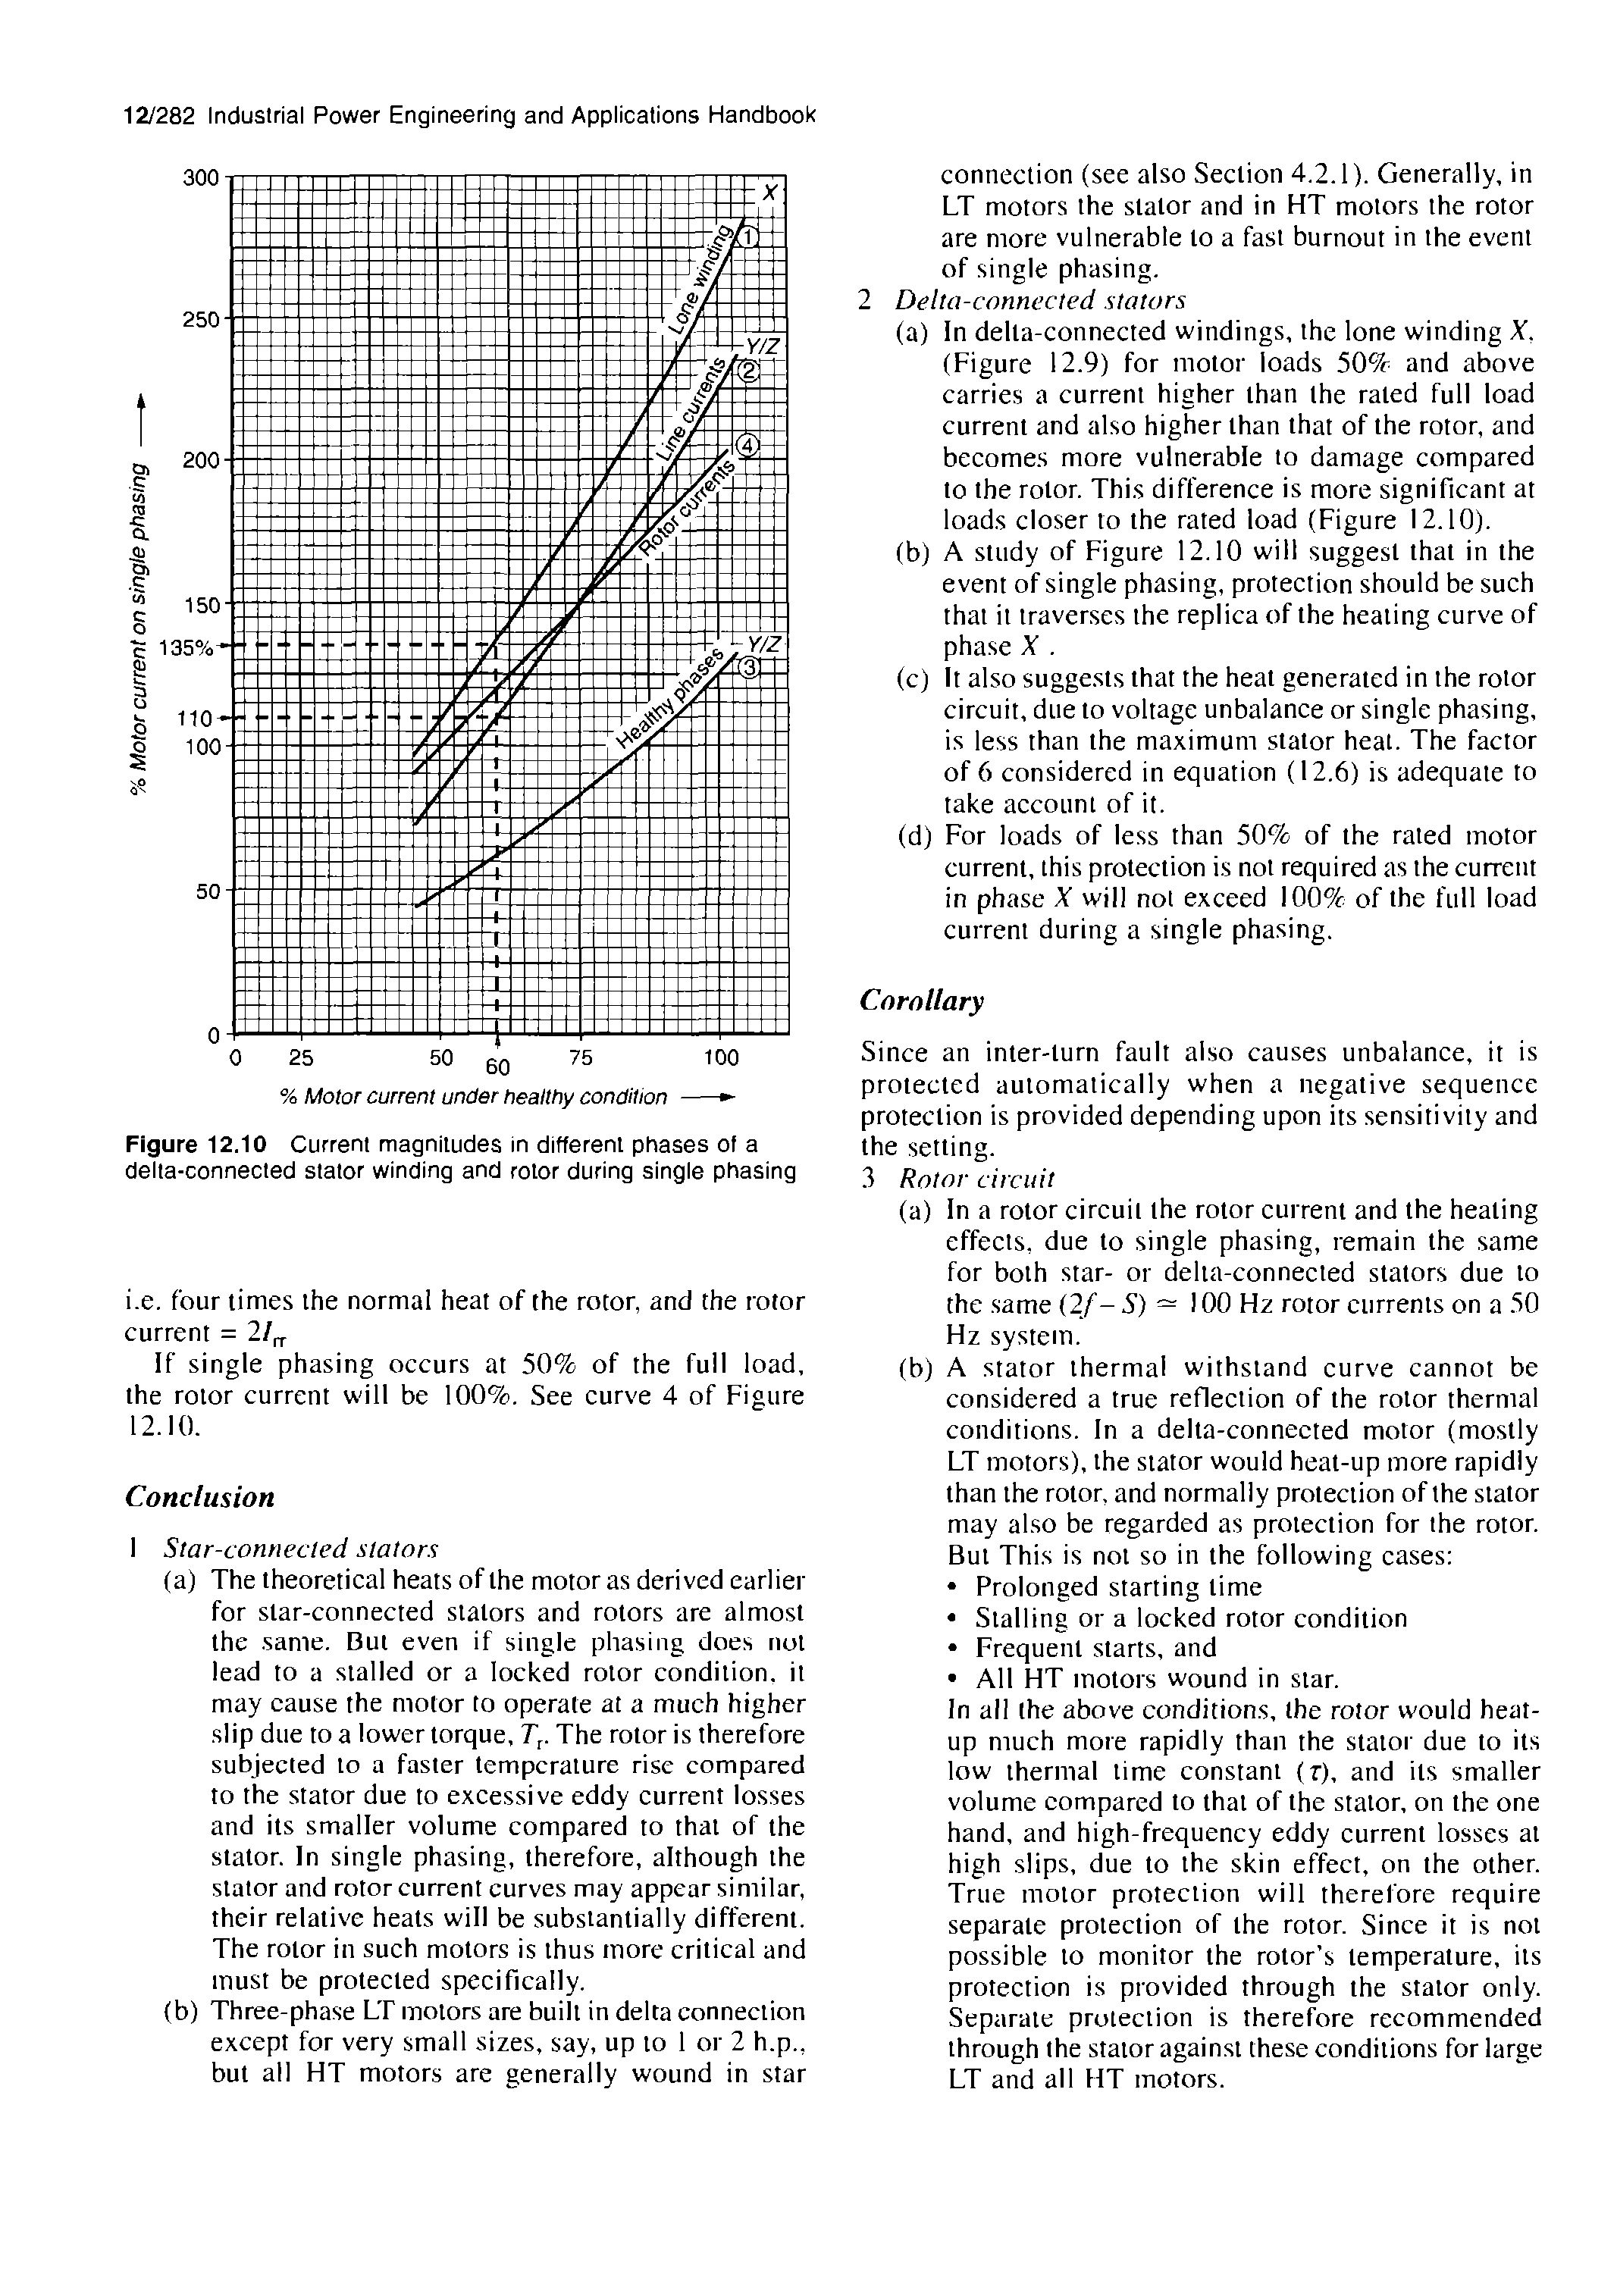 Figure 12.10 Current magnitudes in different phases of a delta-connected stator winding and rotor during single phasing...